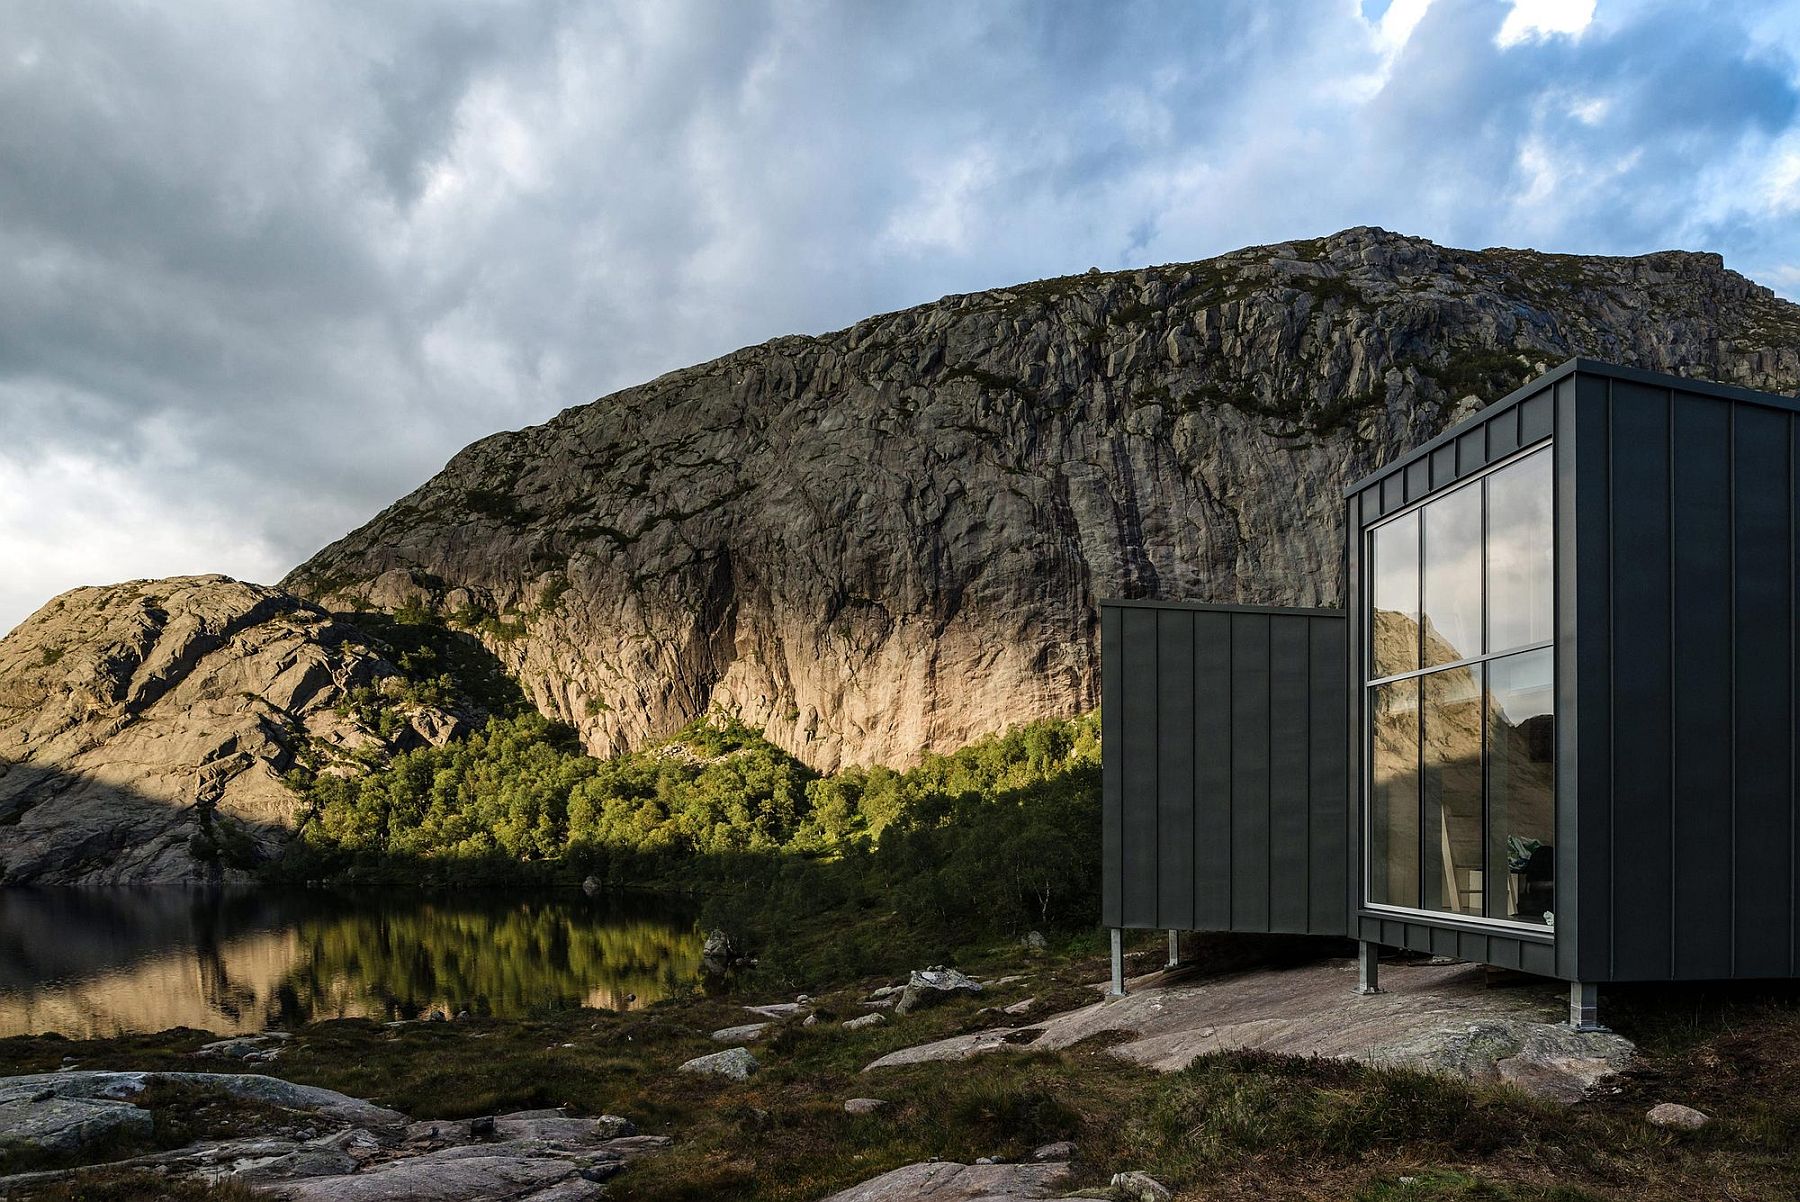 Self-catering mountain lodges in Norway